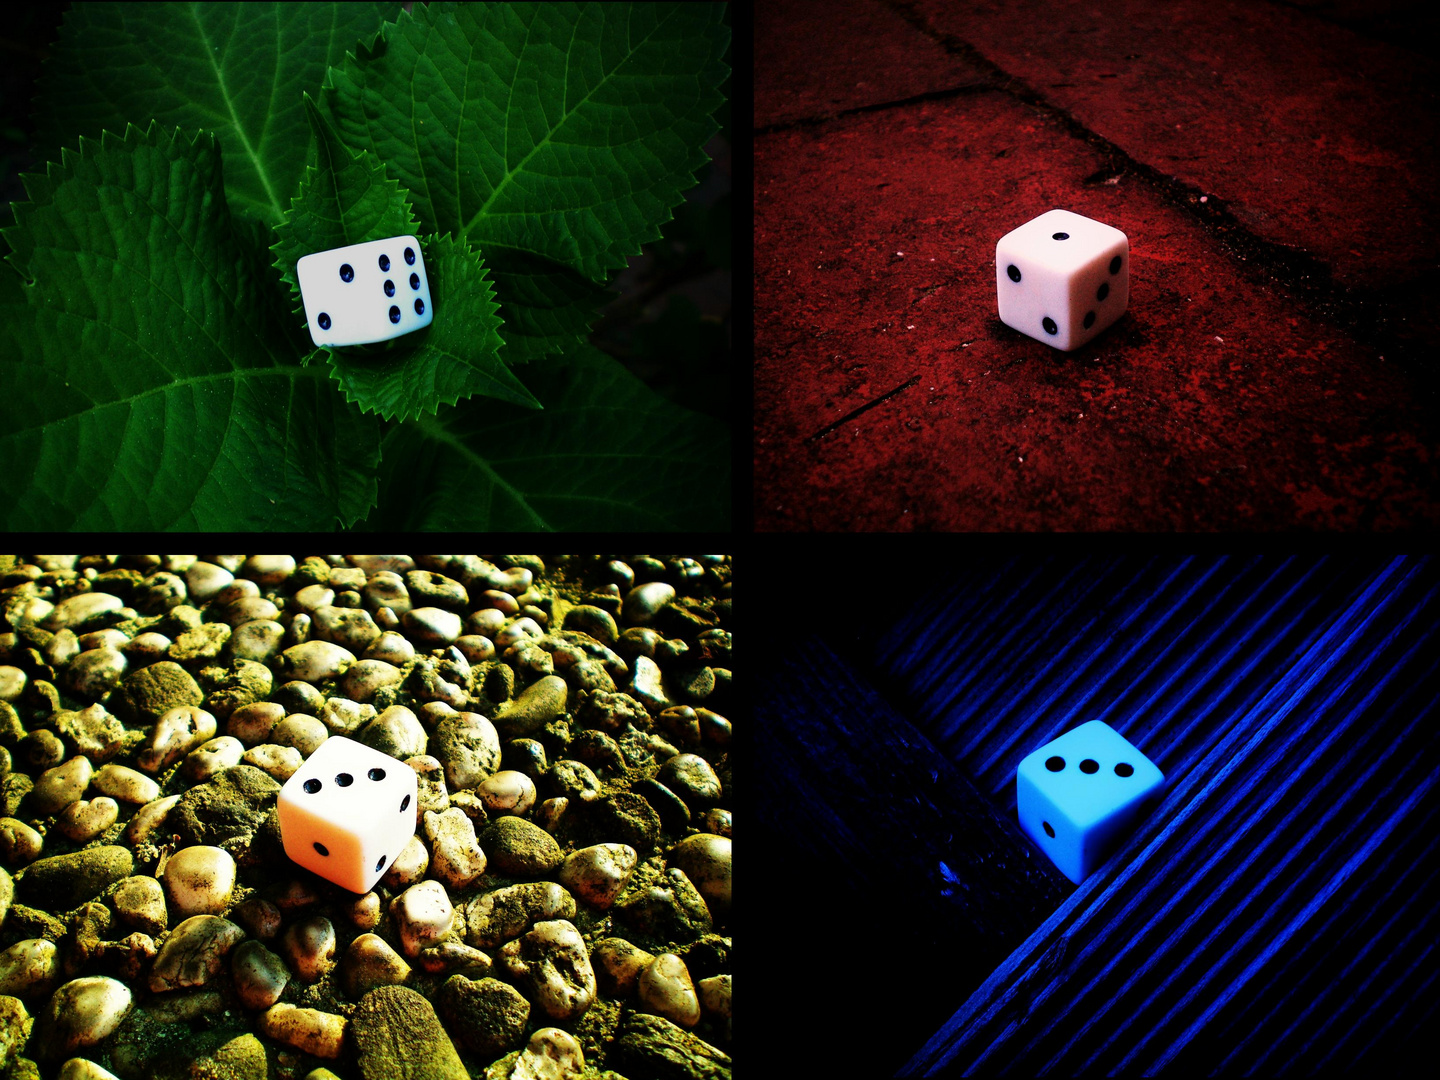 colours and dice